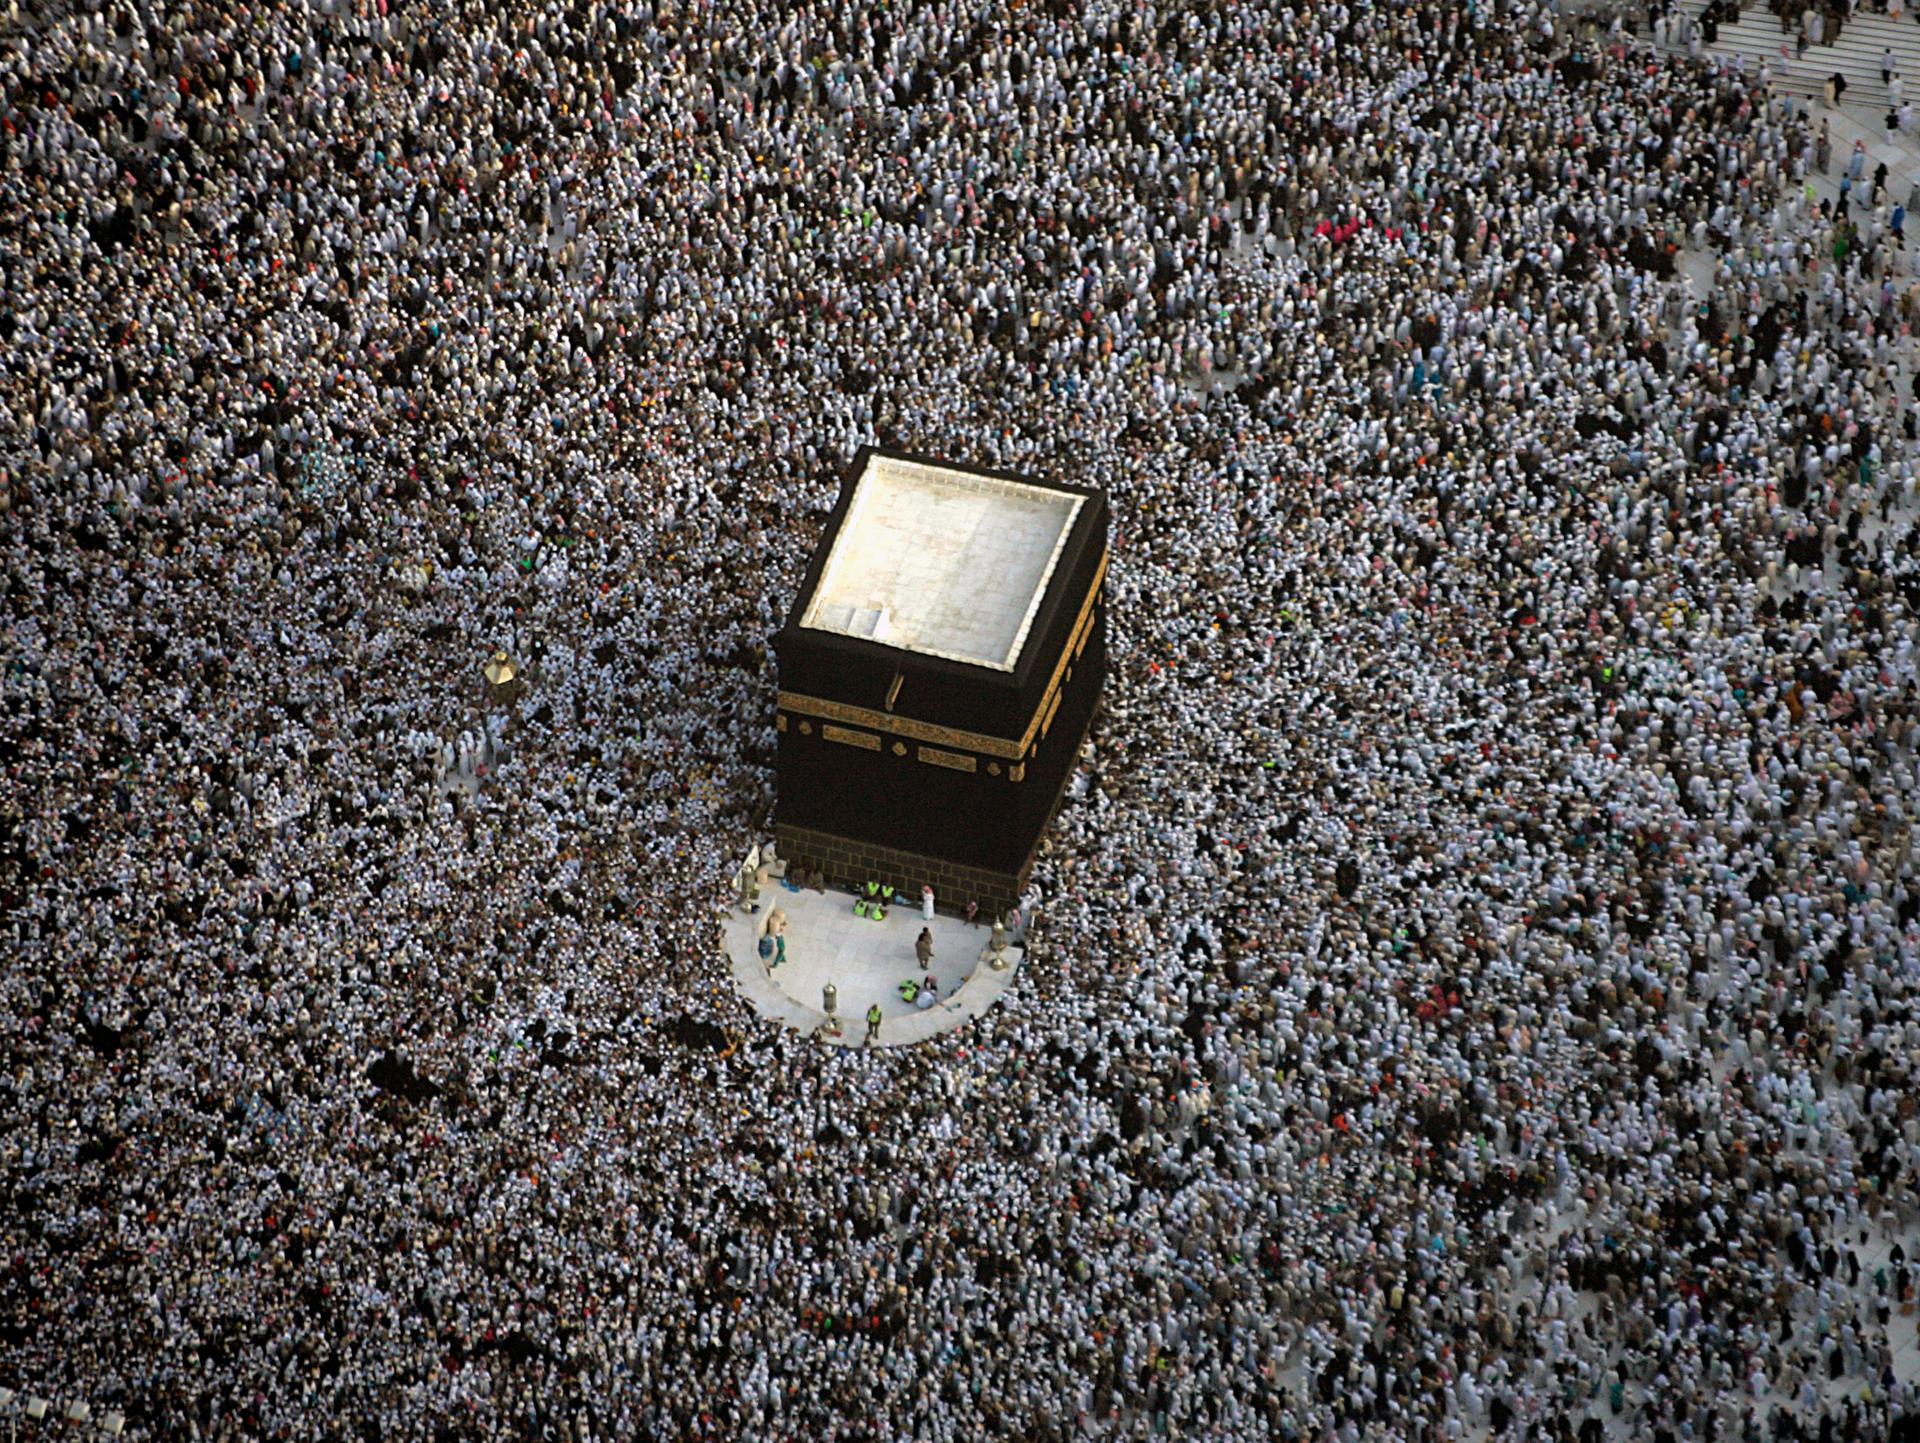 An aerial view of the Haj pilgrimage in Mecca